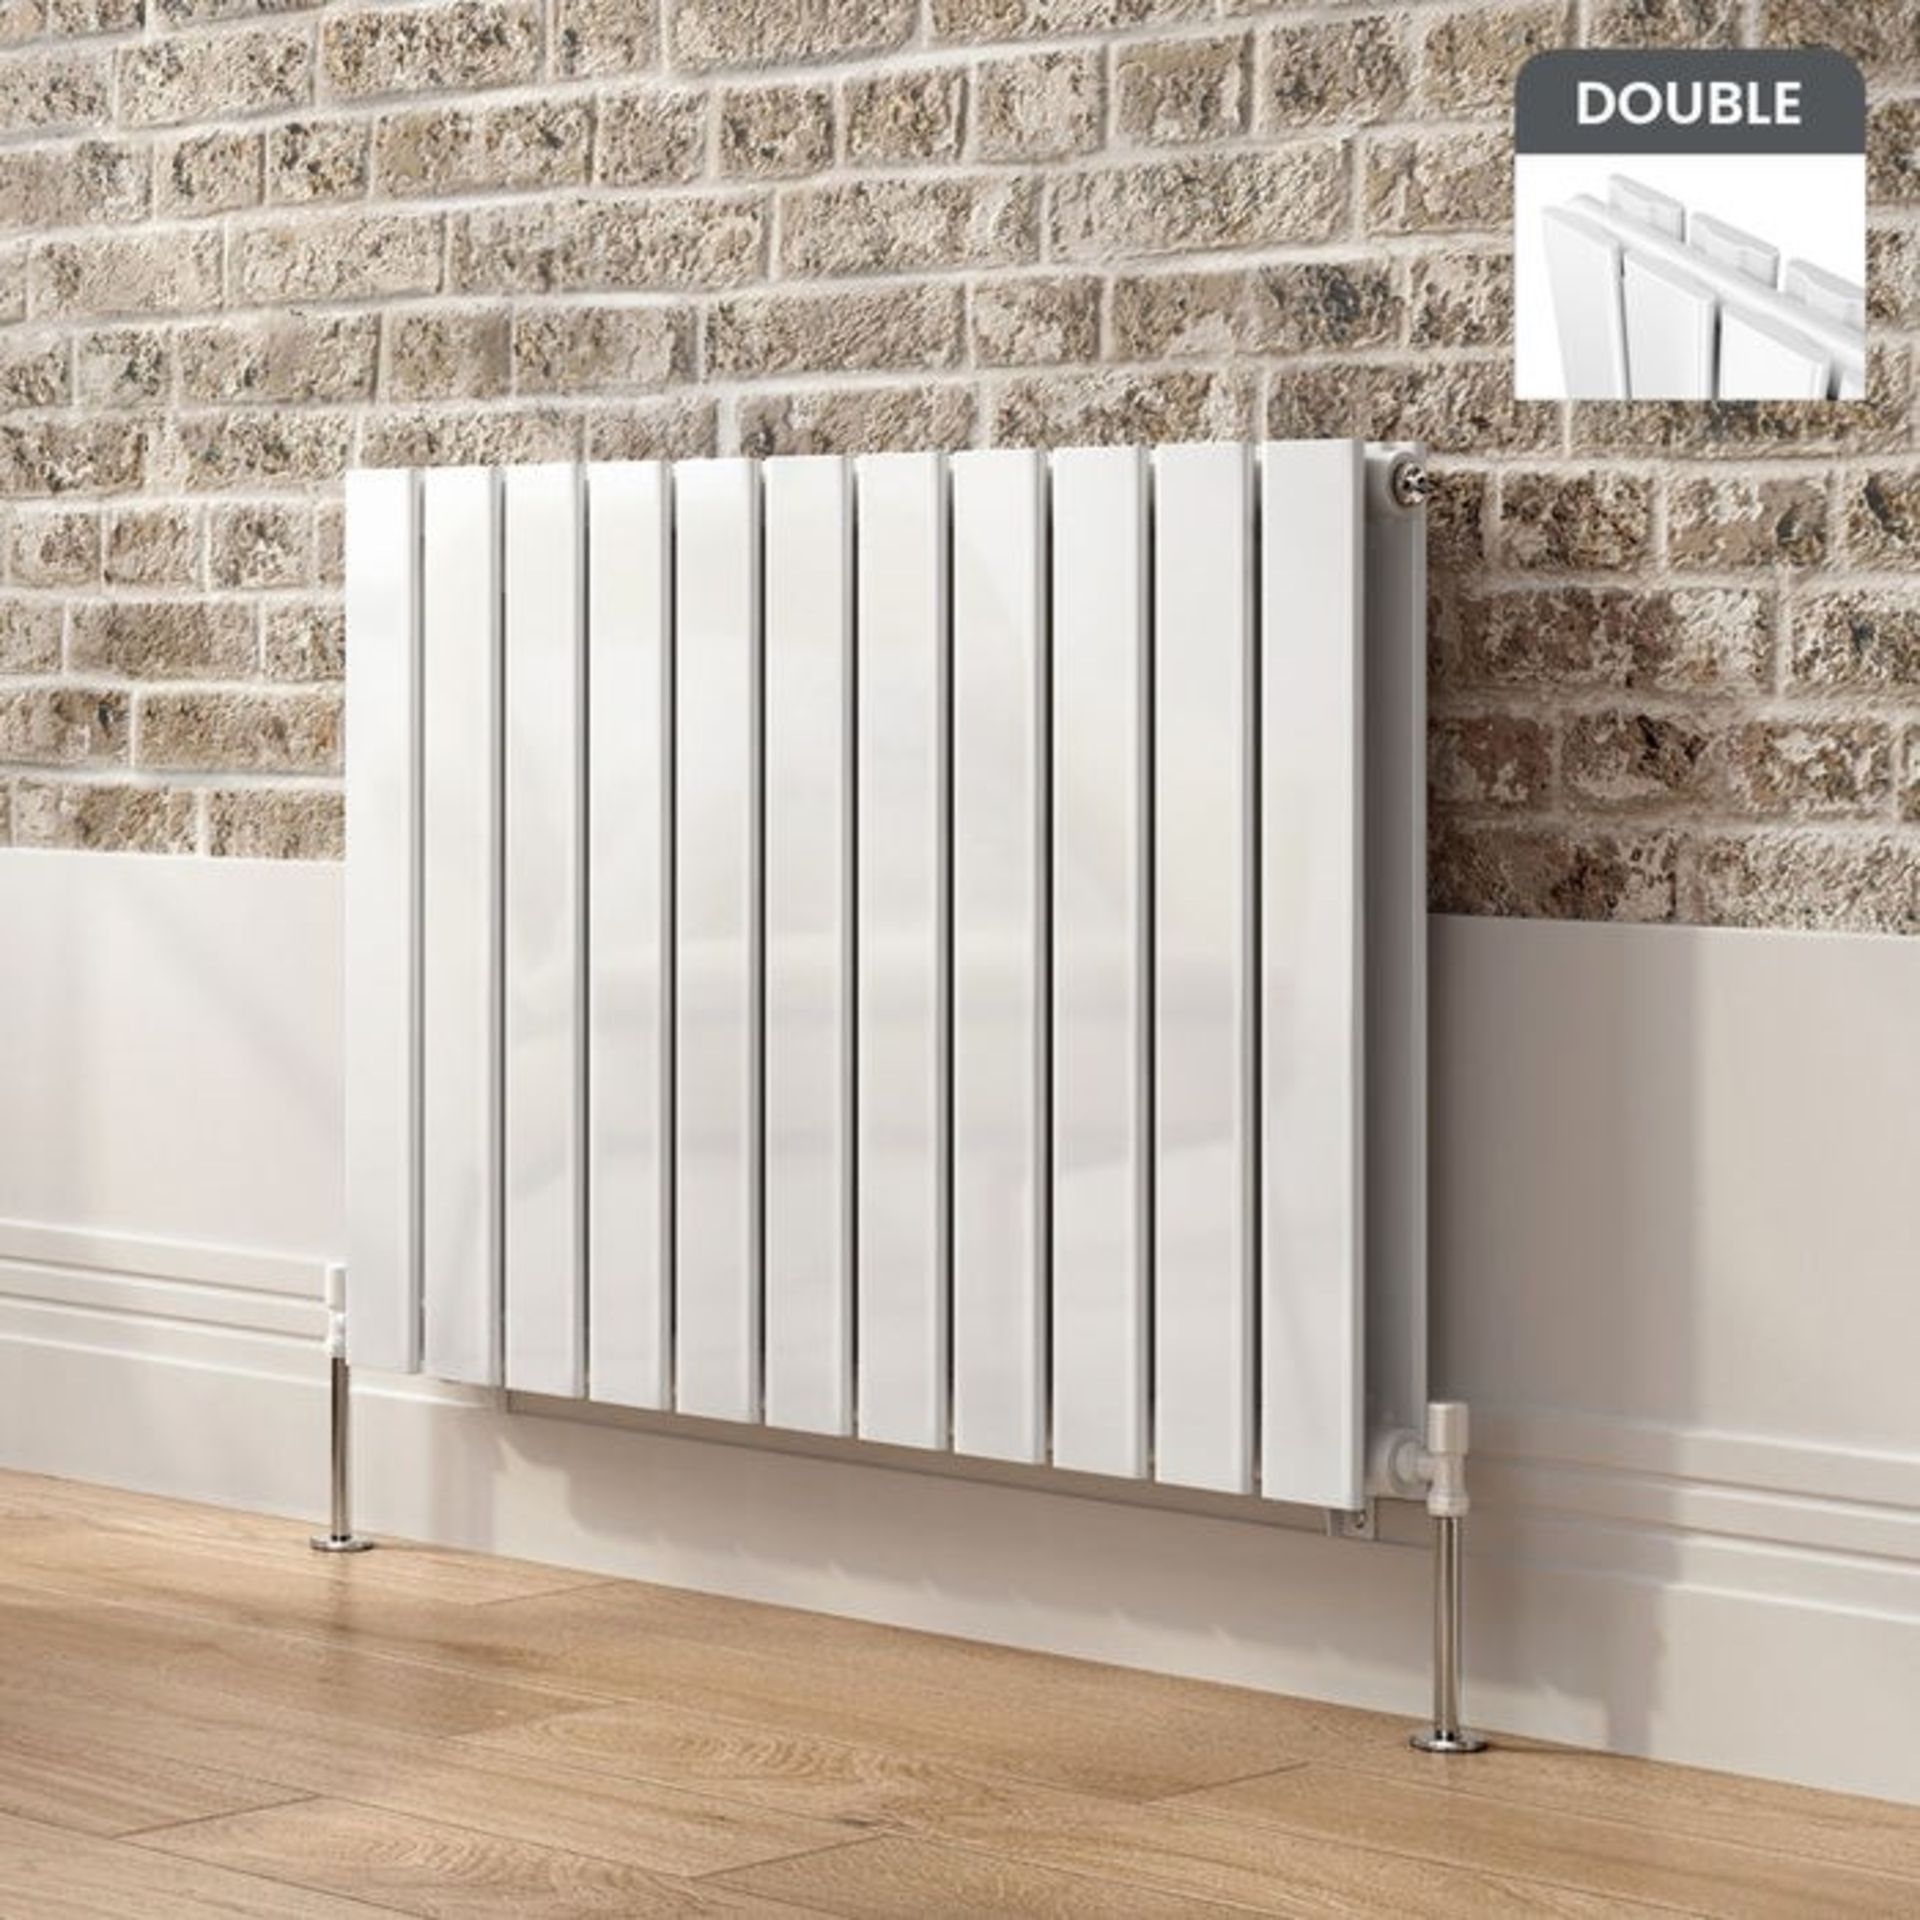 600x830mm Gloss White Double Flat Panel Horizontal Radiator. RRP £474.99.RC221.Made with high ... - Image 3 of 3